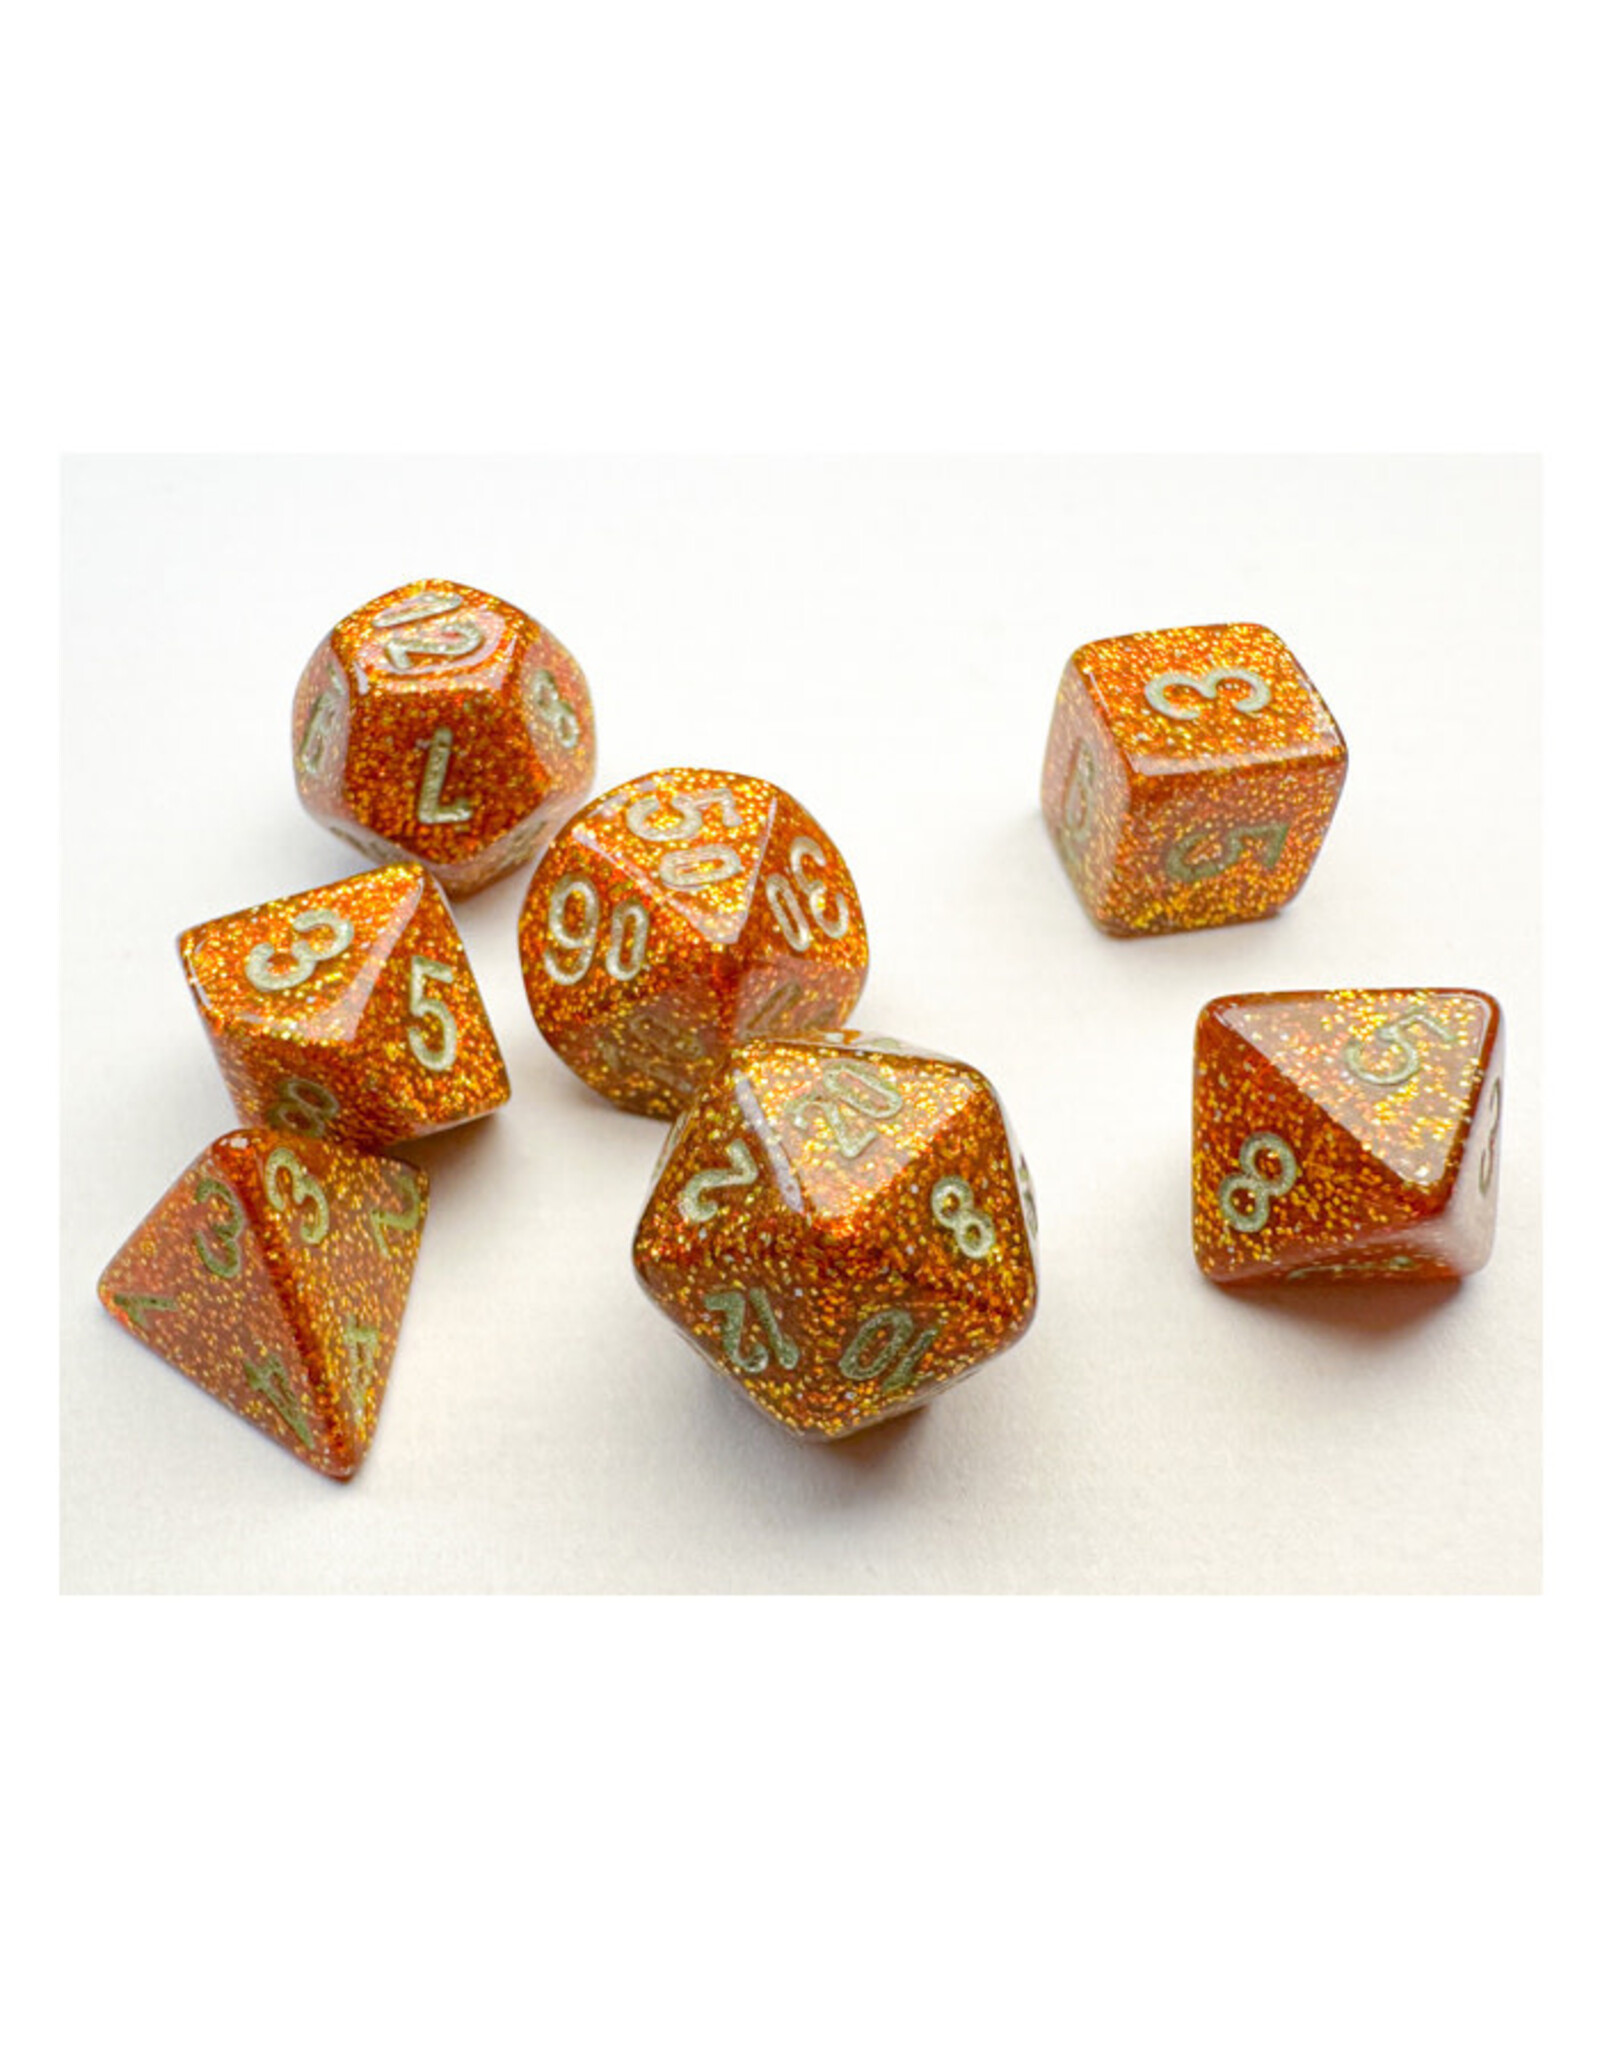 Chessex Mini Glitter Gold with Silver poly 7 dice set